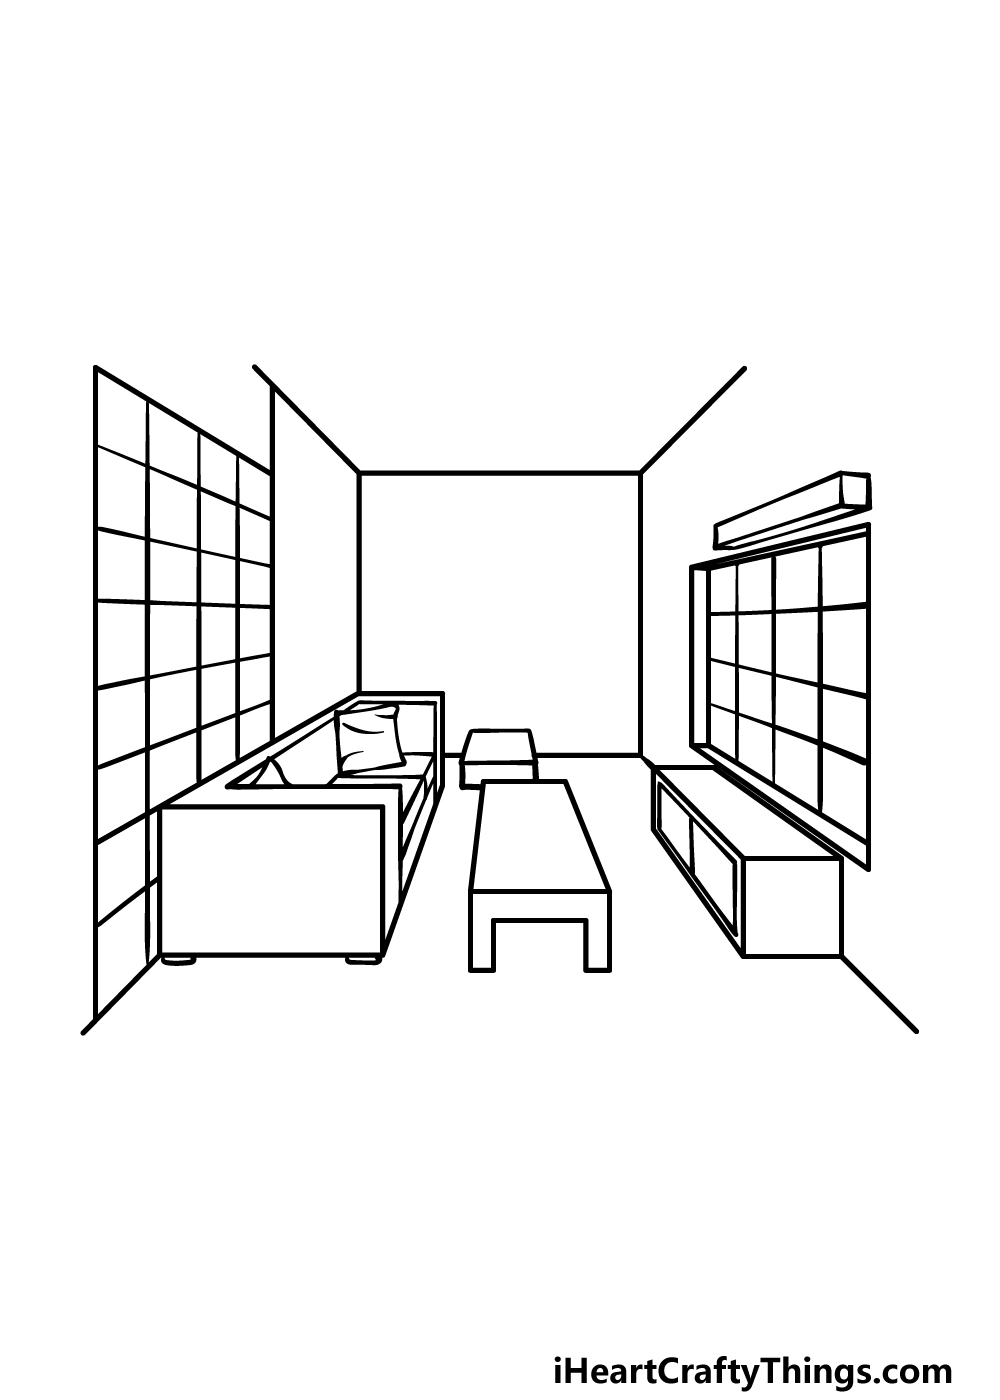 Premium AI Image | Interior in linear sketch form Drawing of a dining room  perspective sketch of an inside space using an outline drawing